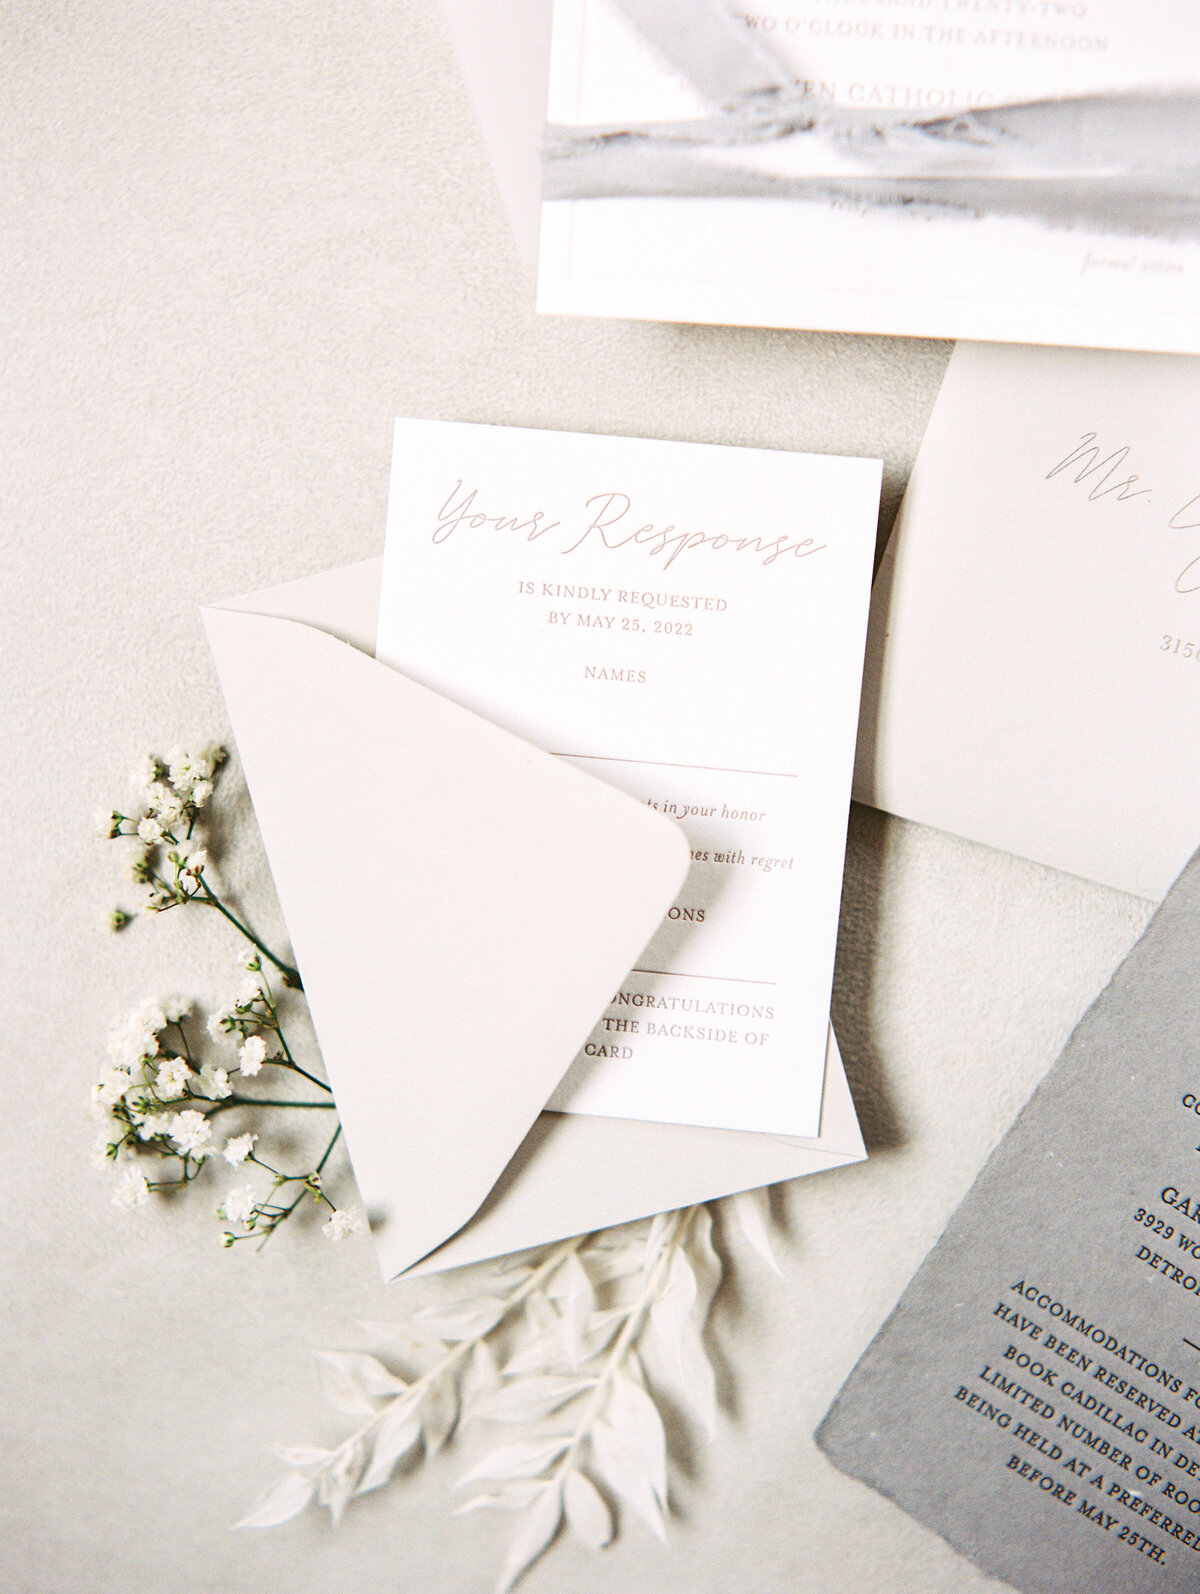 a custom wedding invitation suite from alyssa amez design custom wedding stationery and signage designer against a white background with a white envelope white flowers